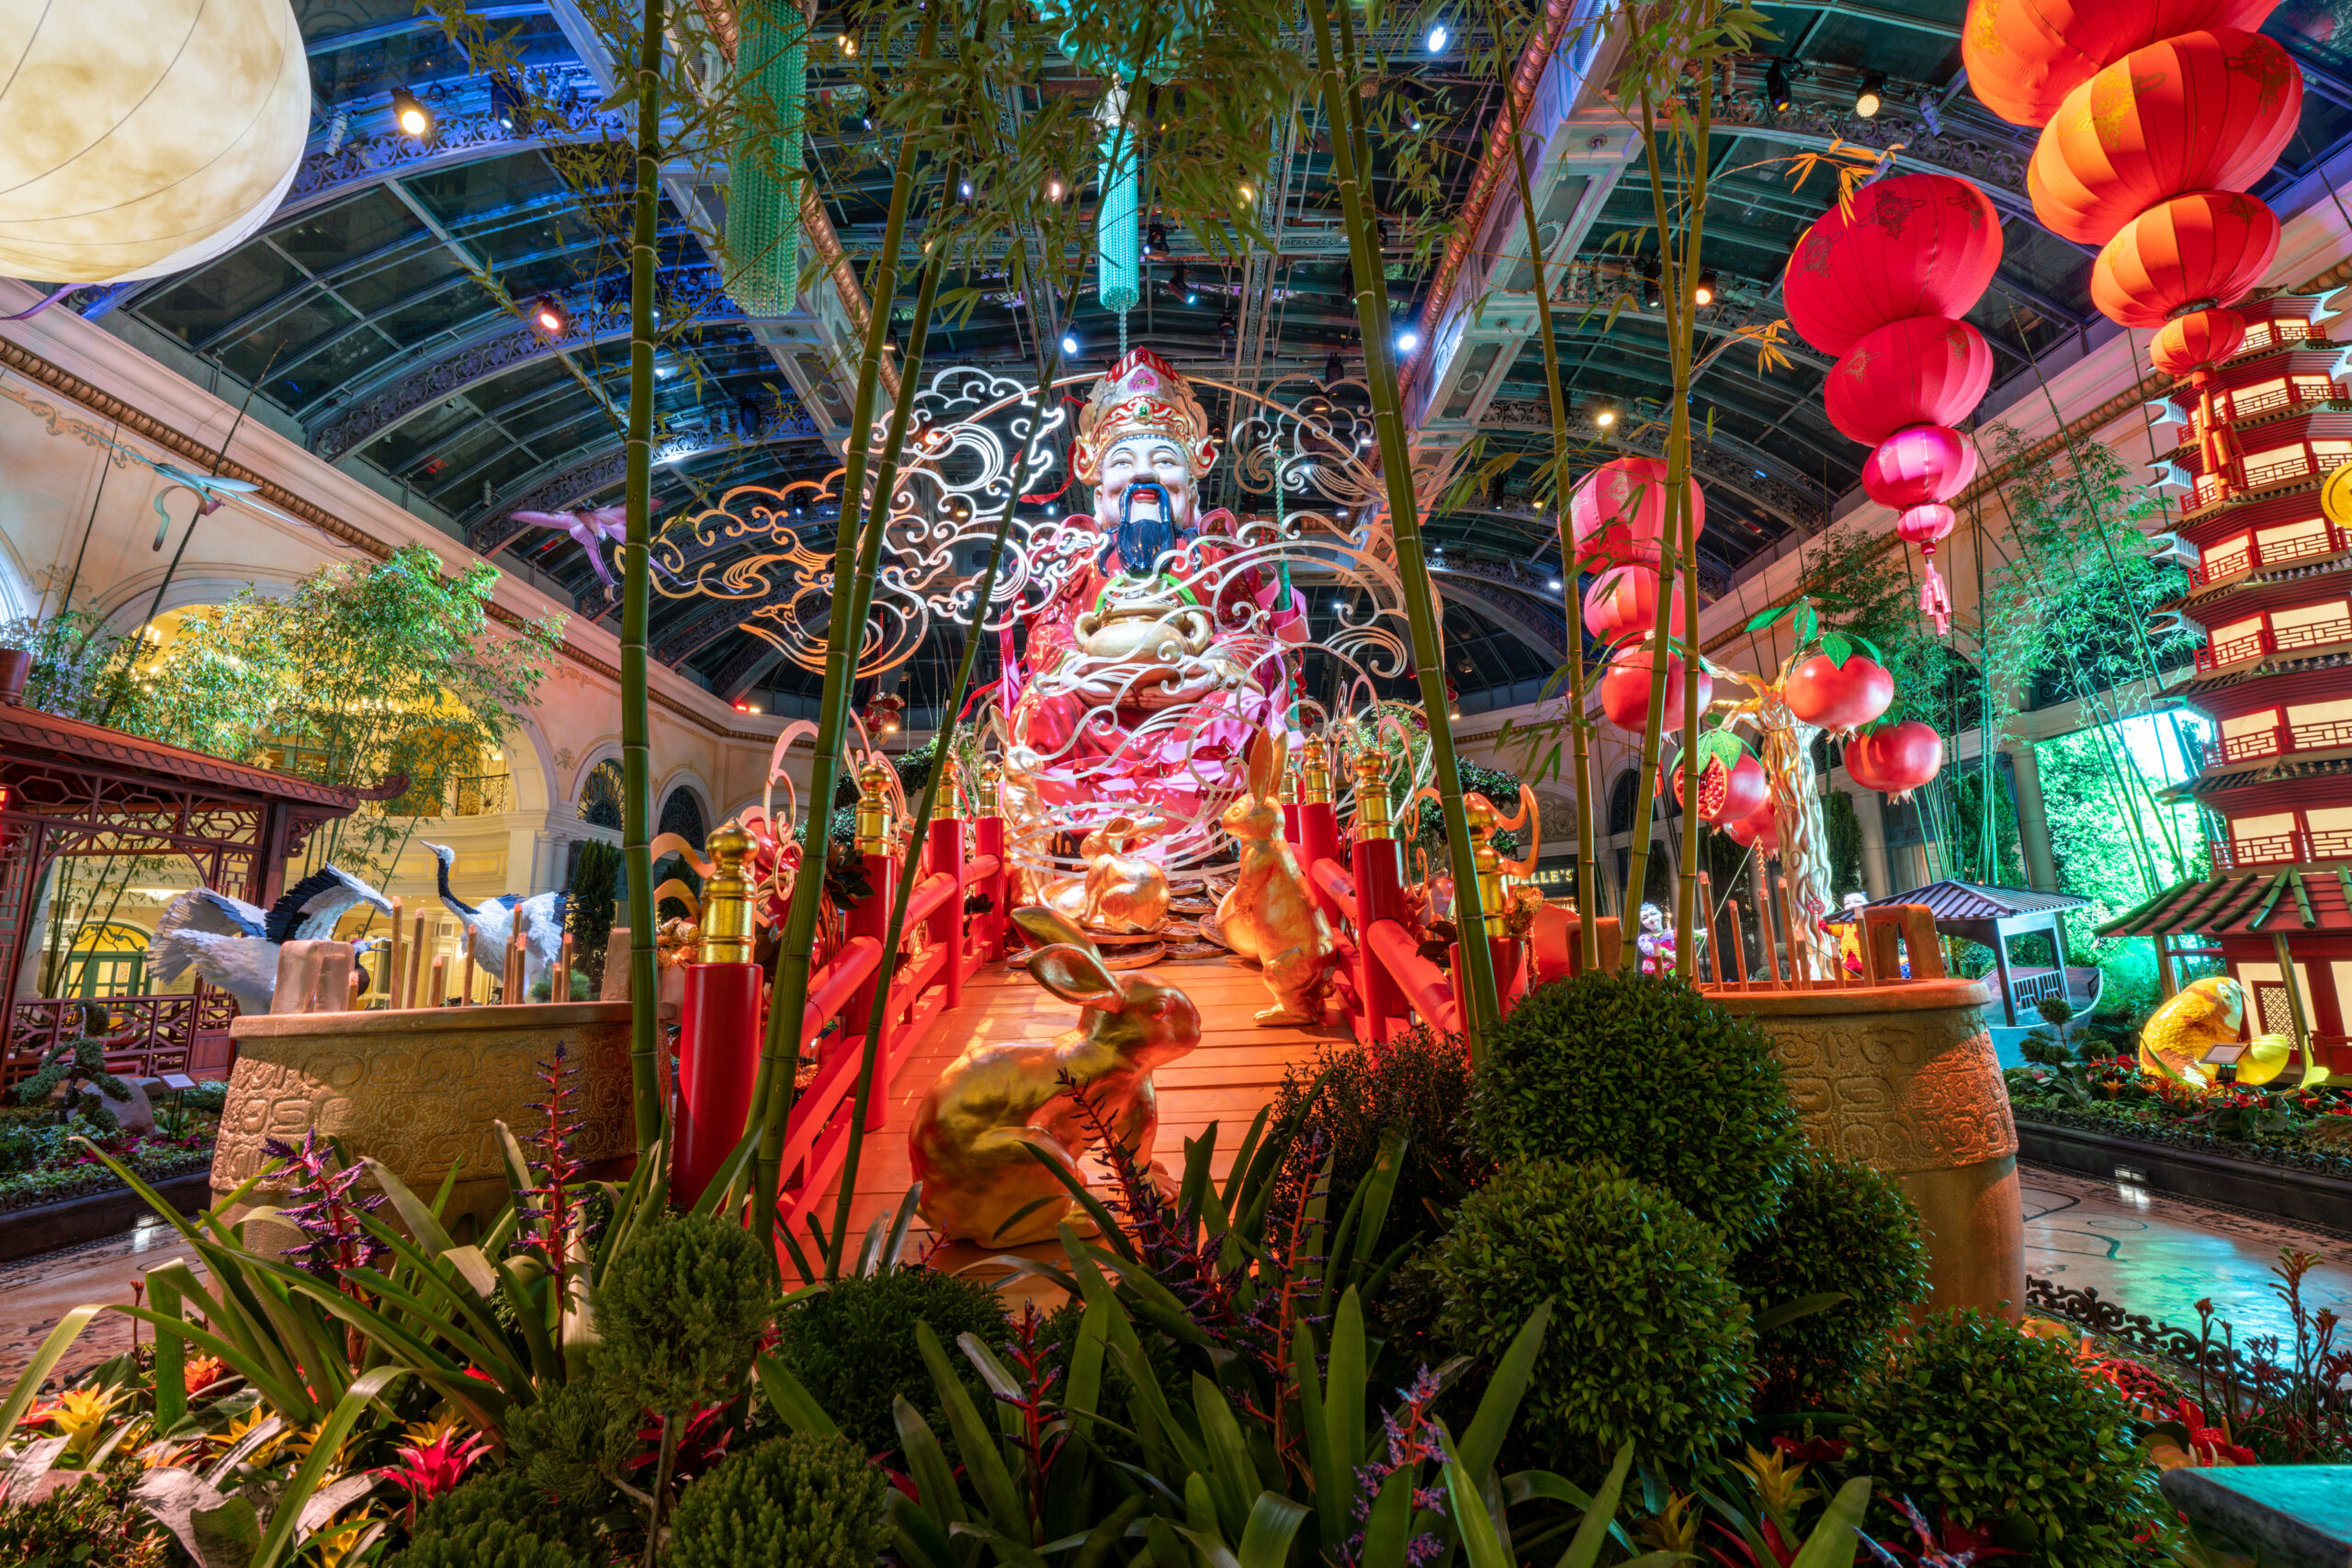 You still have time to see Bellagio’s Conservatory & Botanical Gardens